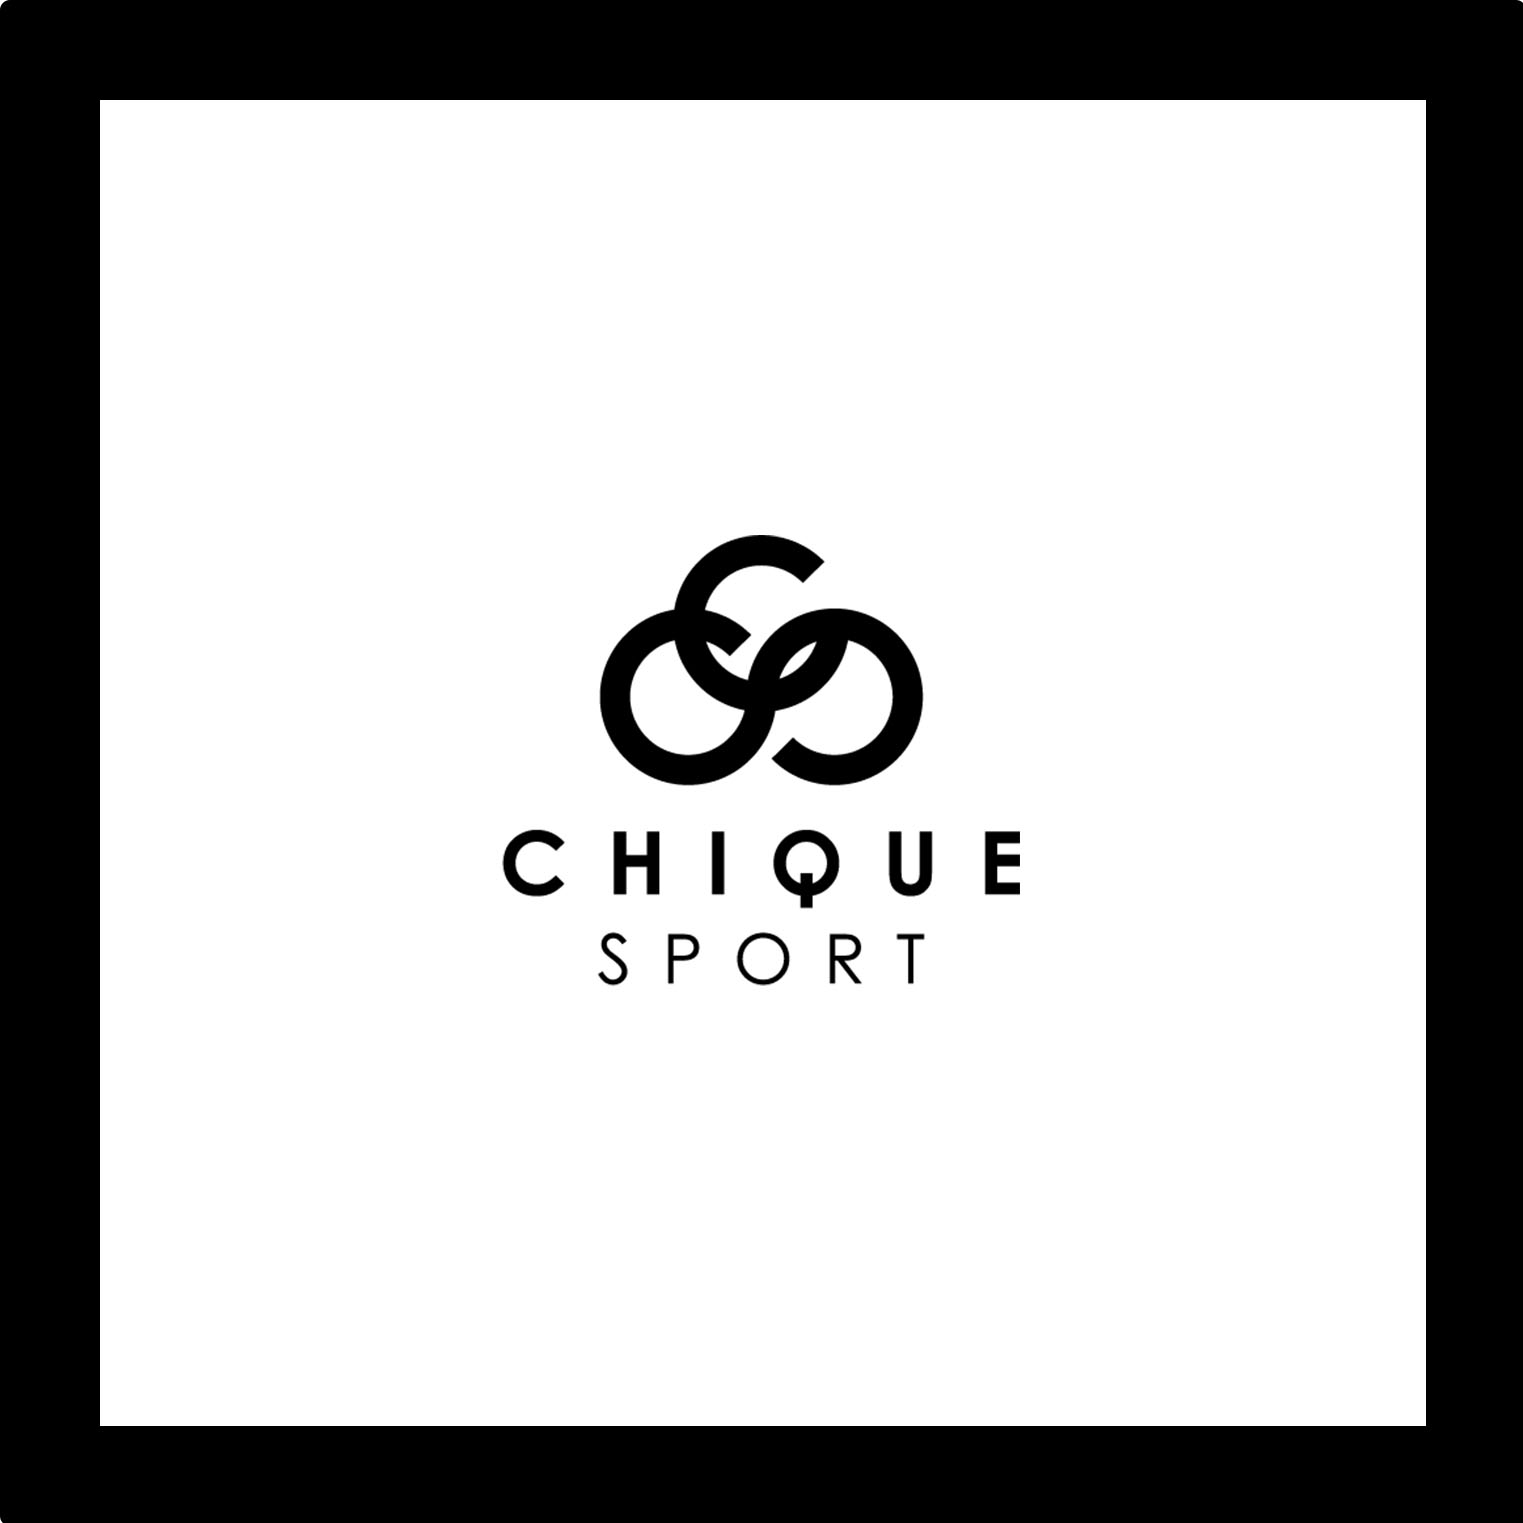 Chique Sport - Redback Creations